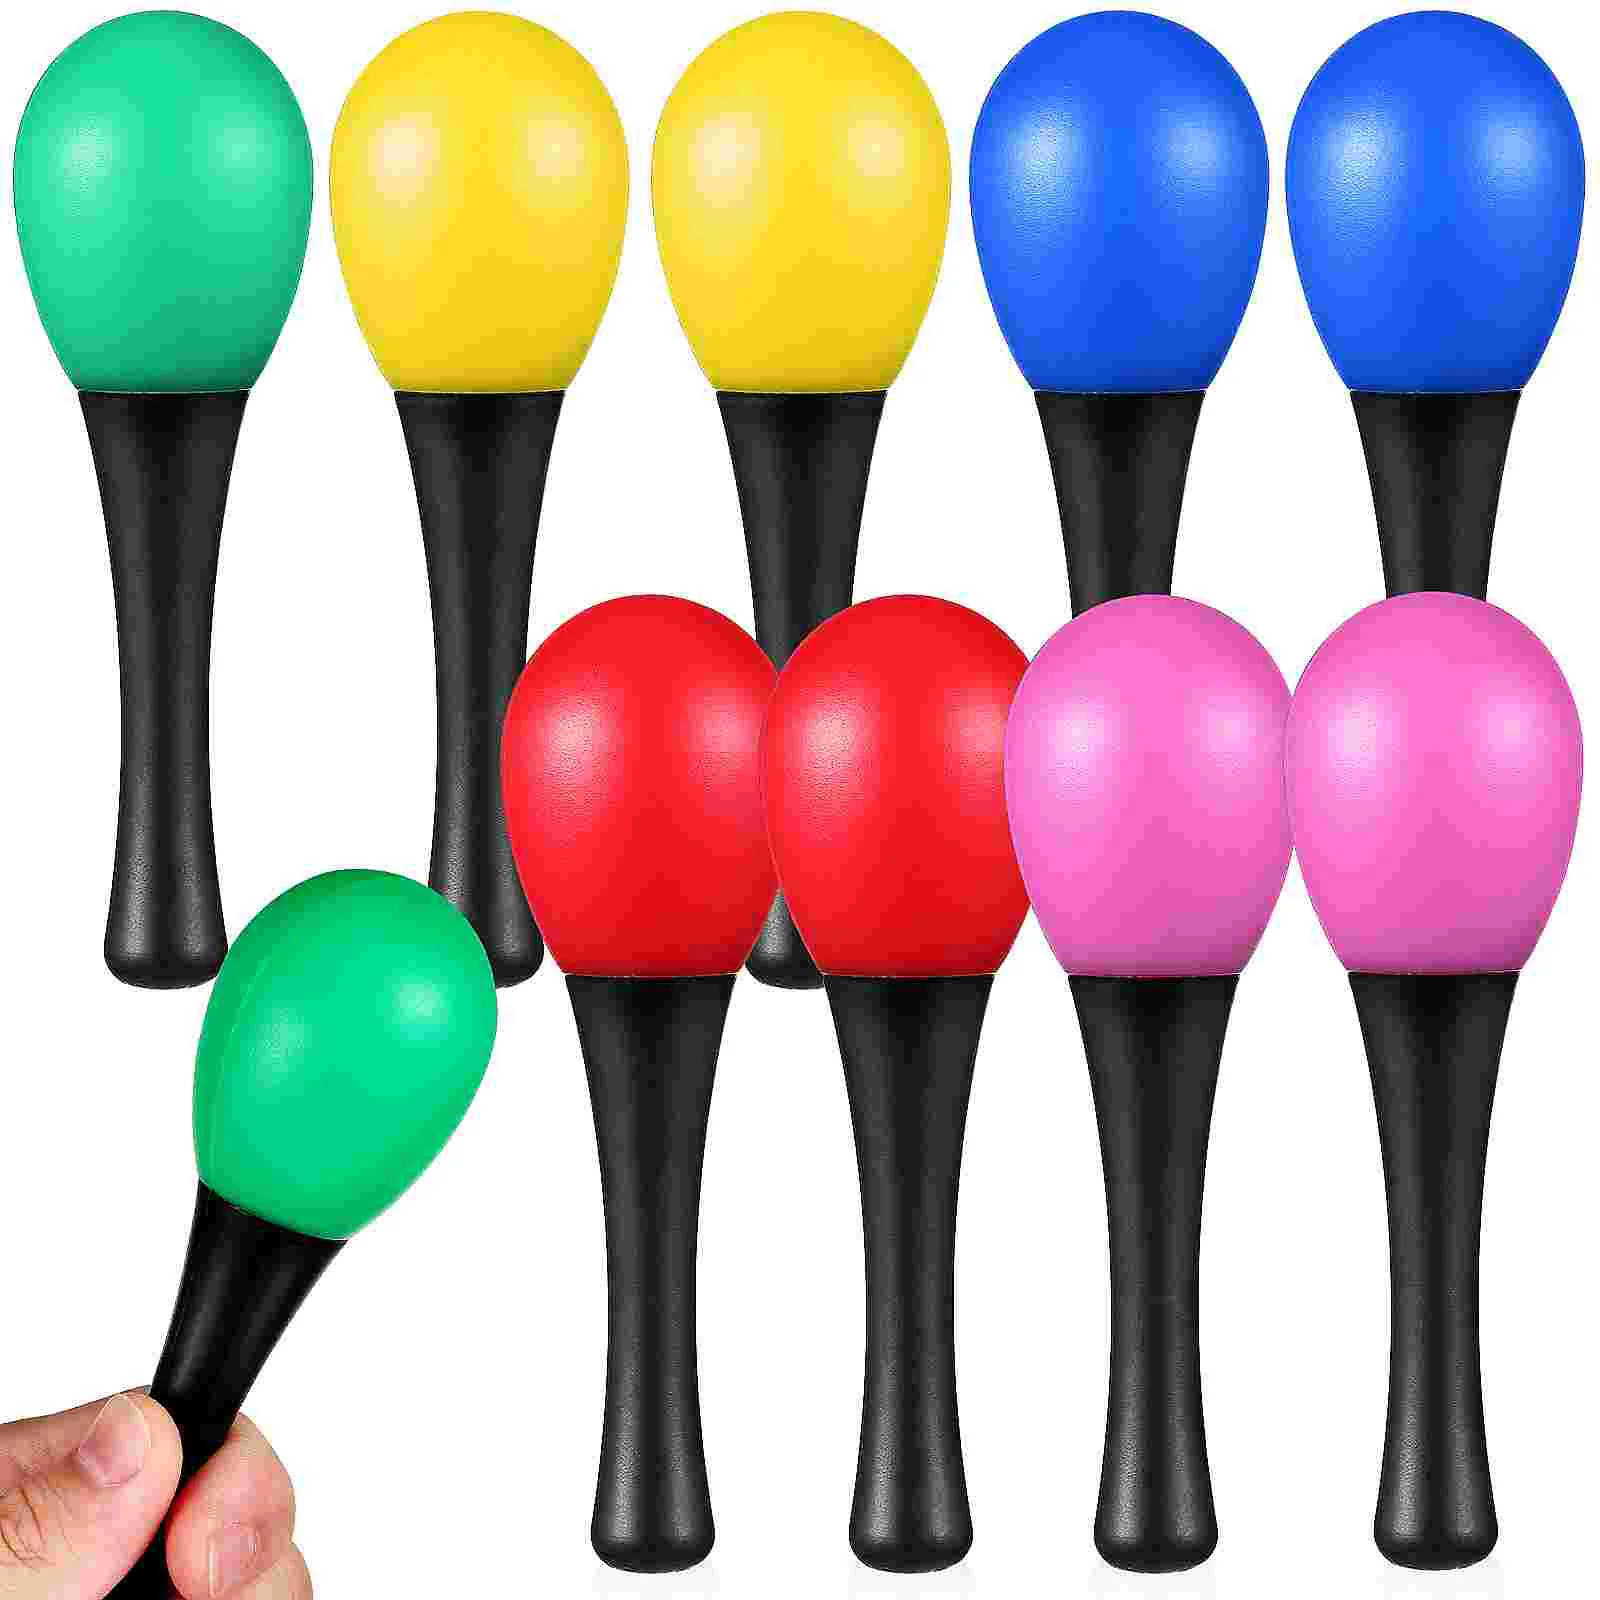 

10 Pcs Small Maraca Mexican Party Favors Maracas Musical Instruments Mini Plastic Training Sand Hammer Plaything Toy